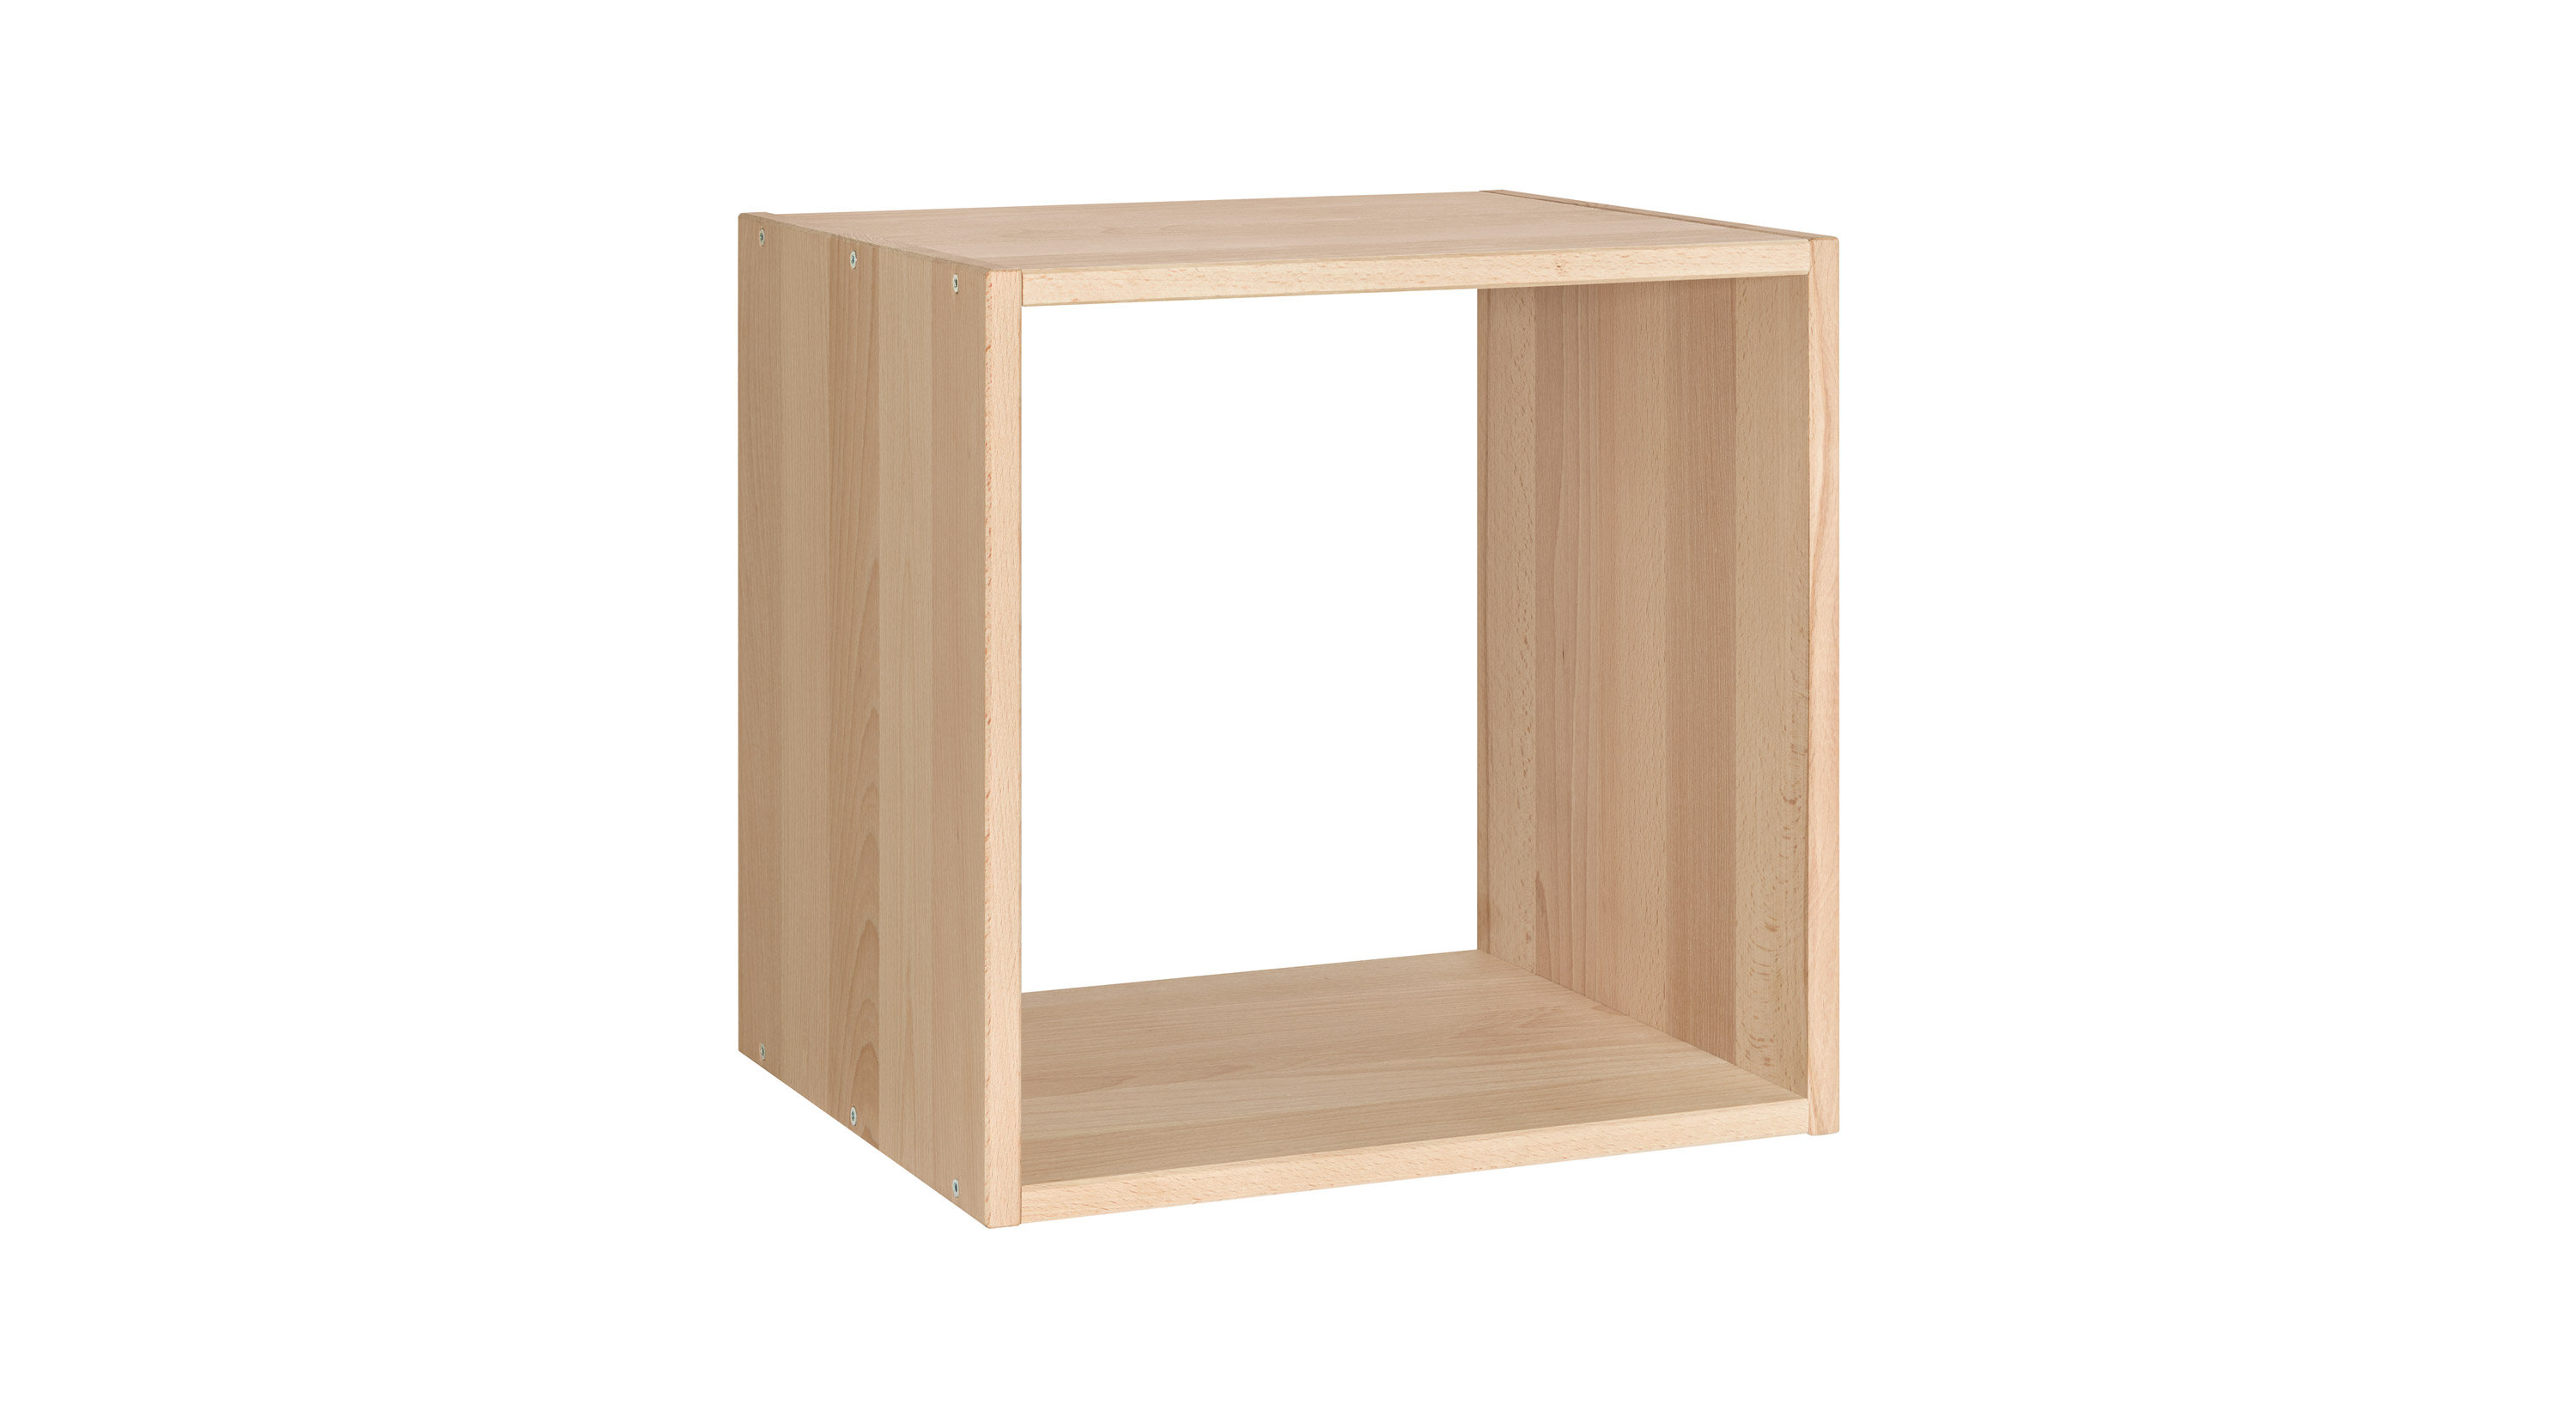 Solid Wood Hanging Box 2 Drawers core beech oiled Cabinet Wood Cube Unit 